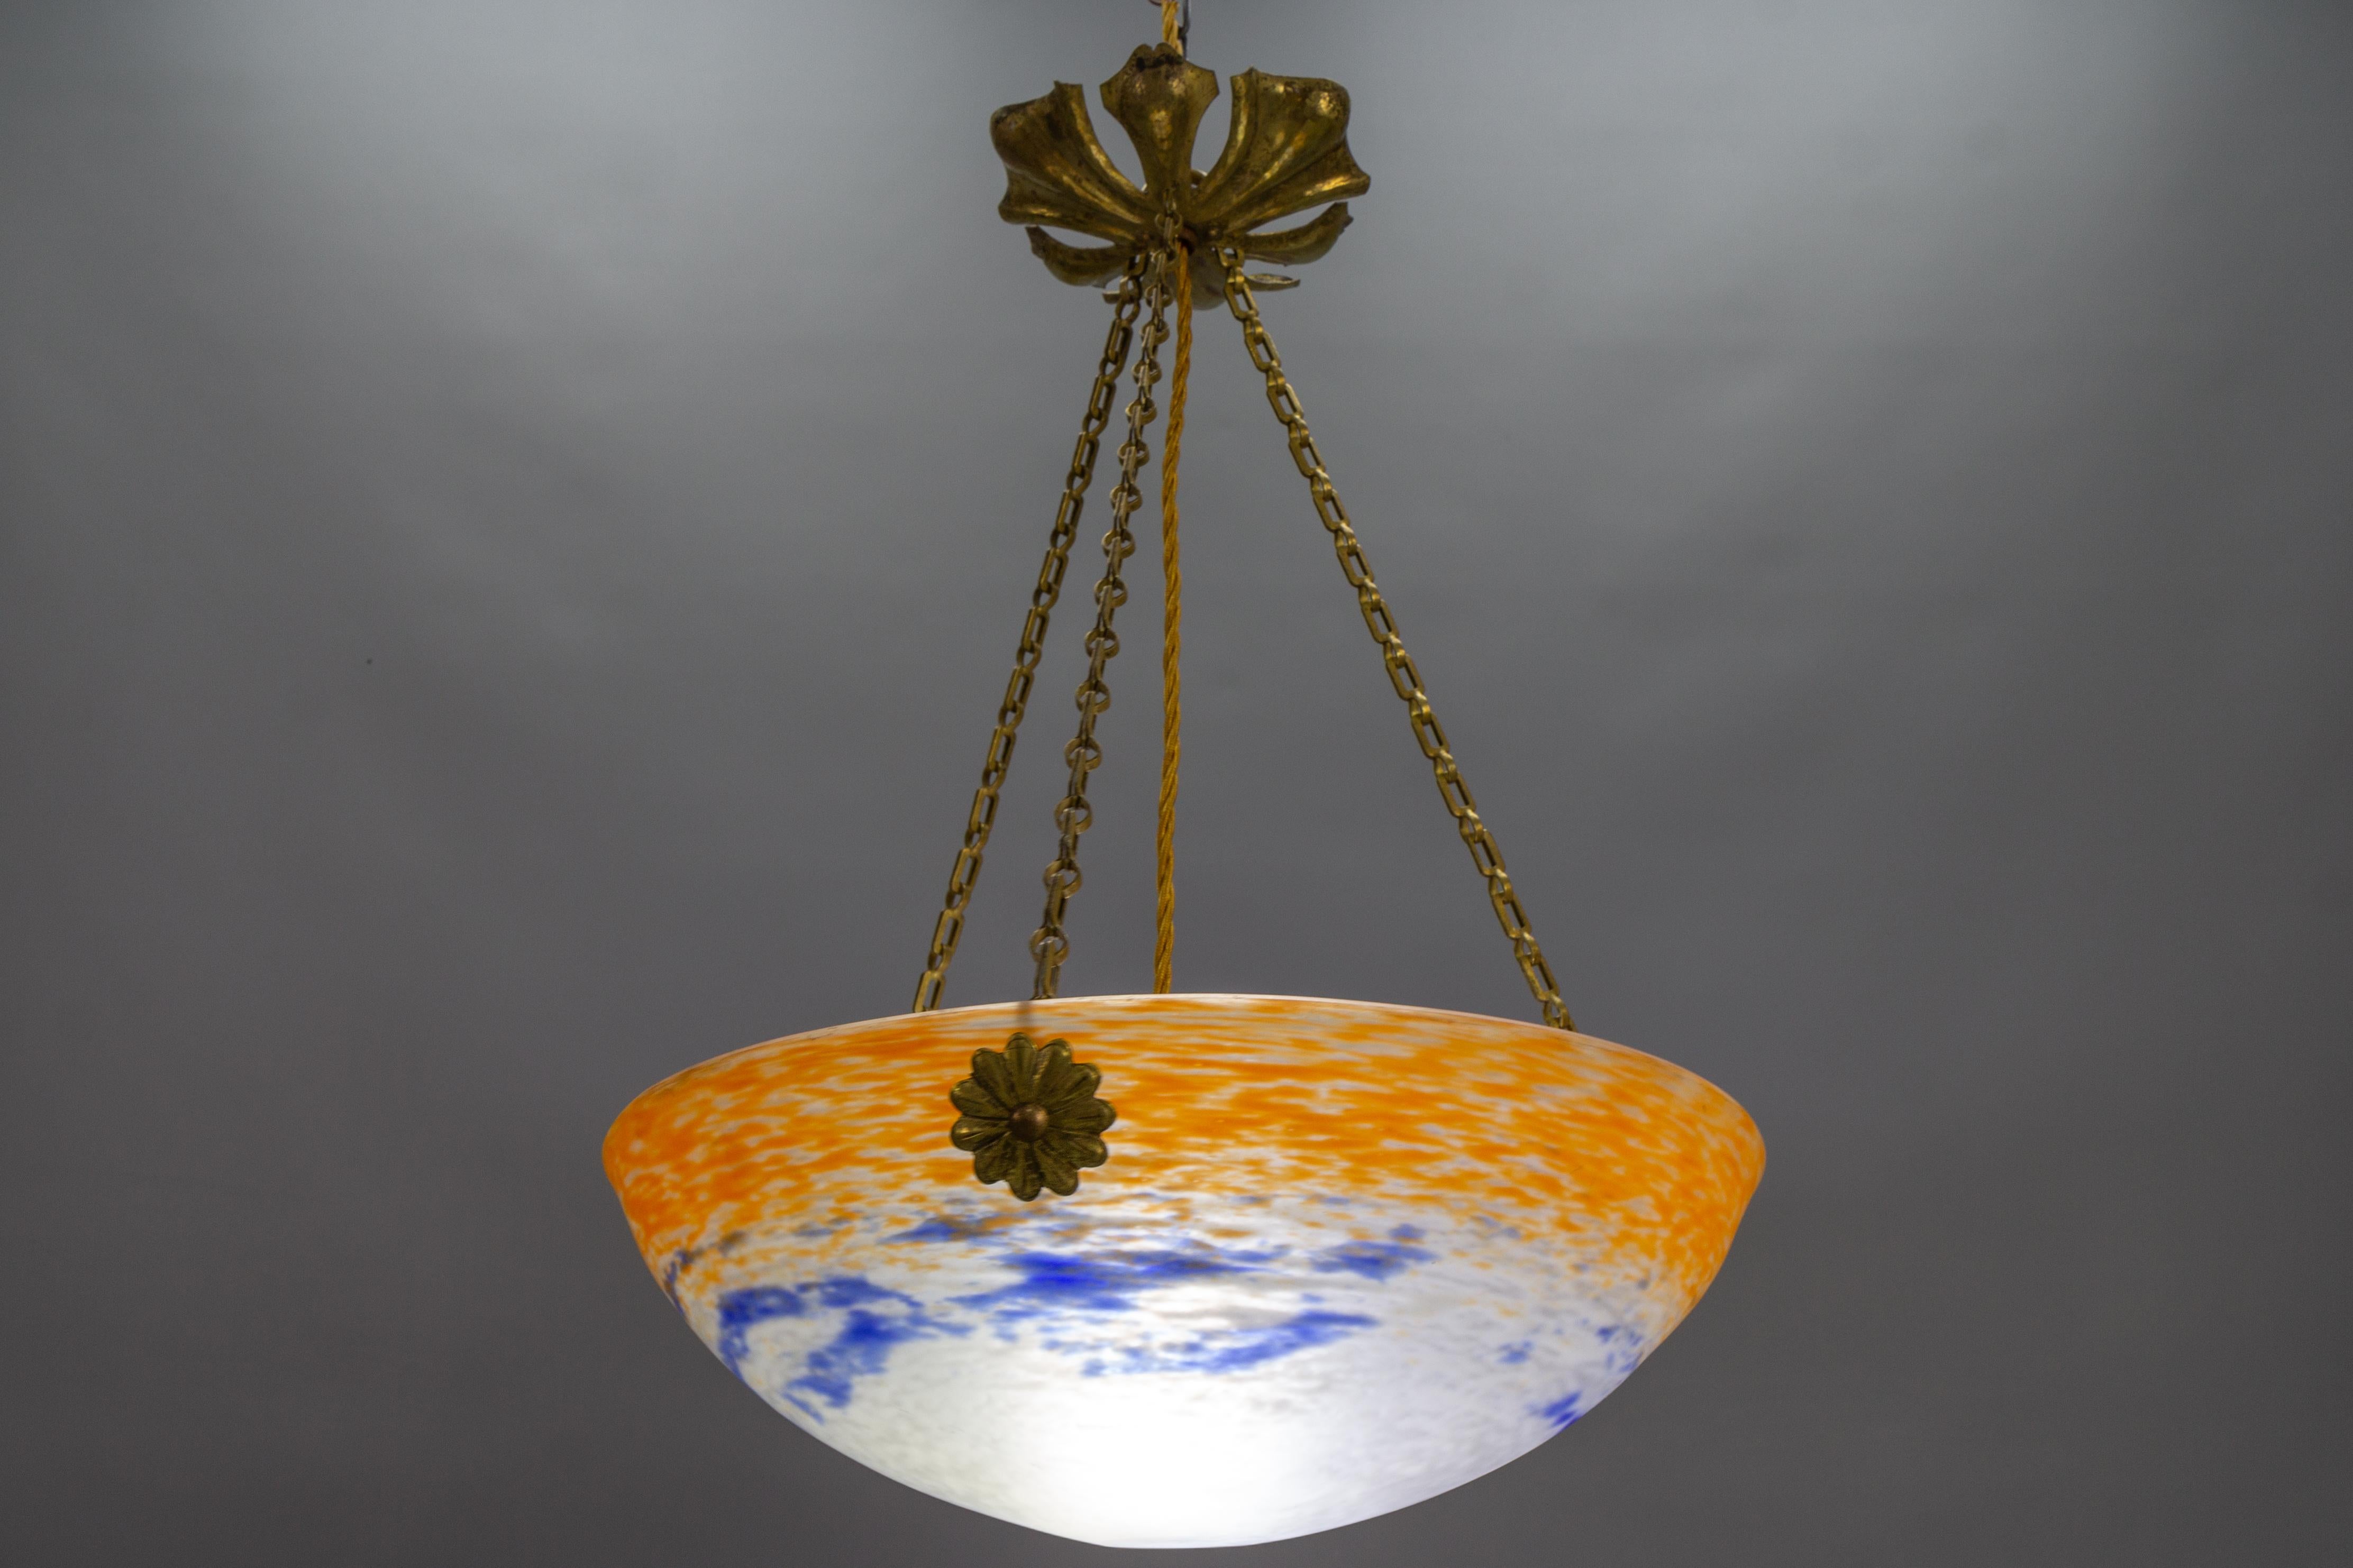 French Art Nouveau Orange, White and Blue Glass Pendant Light by Noverdy, 1920s For Sale 6